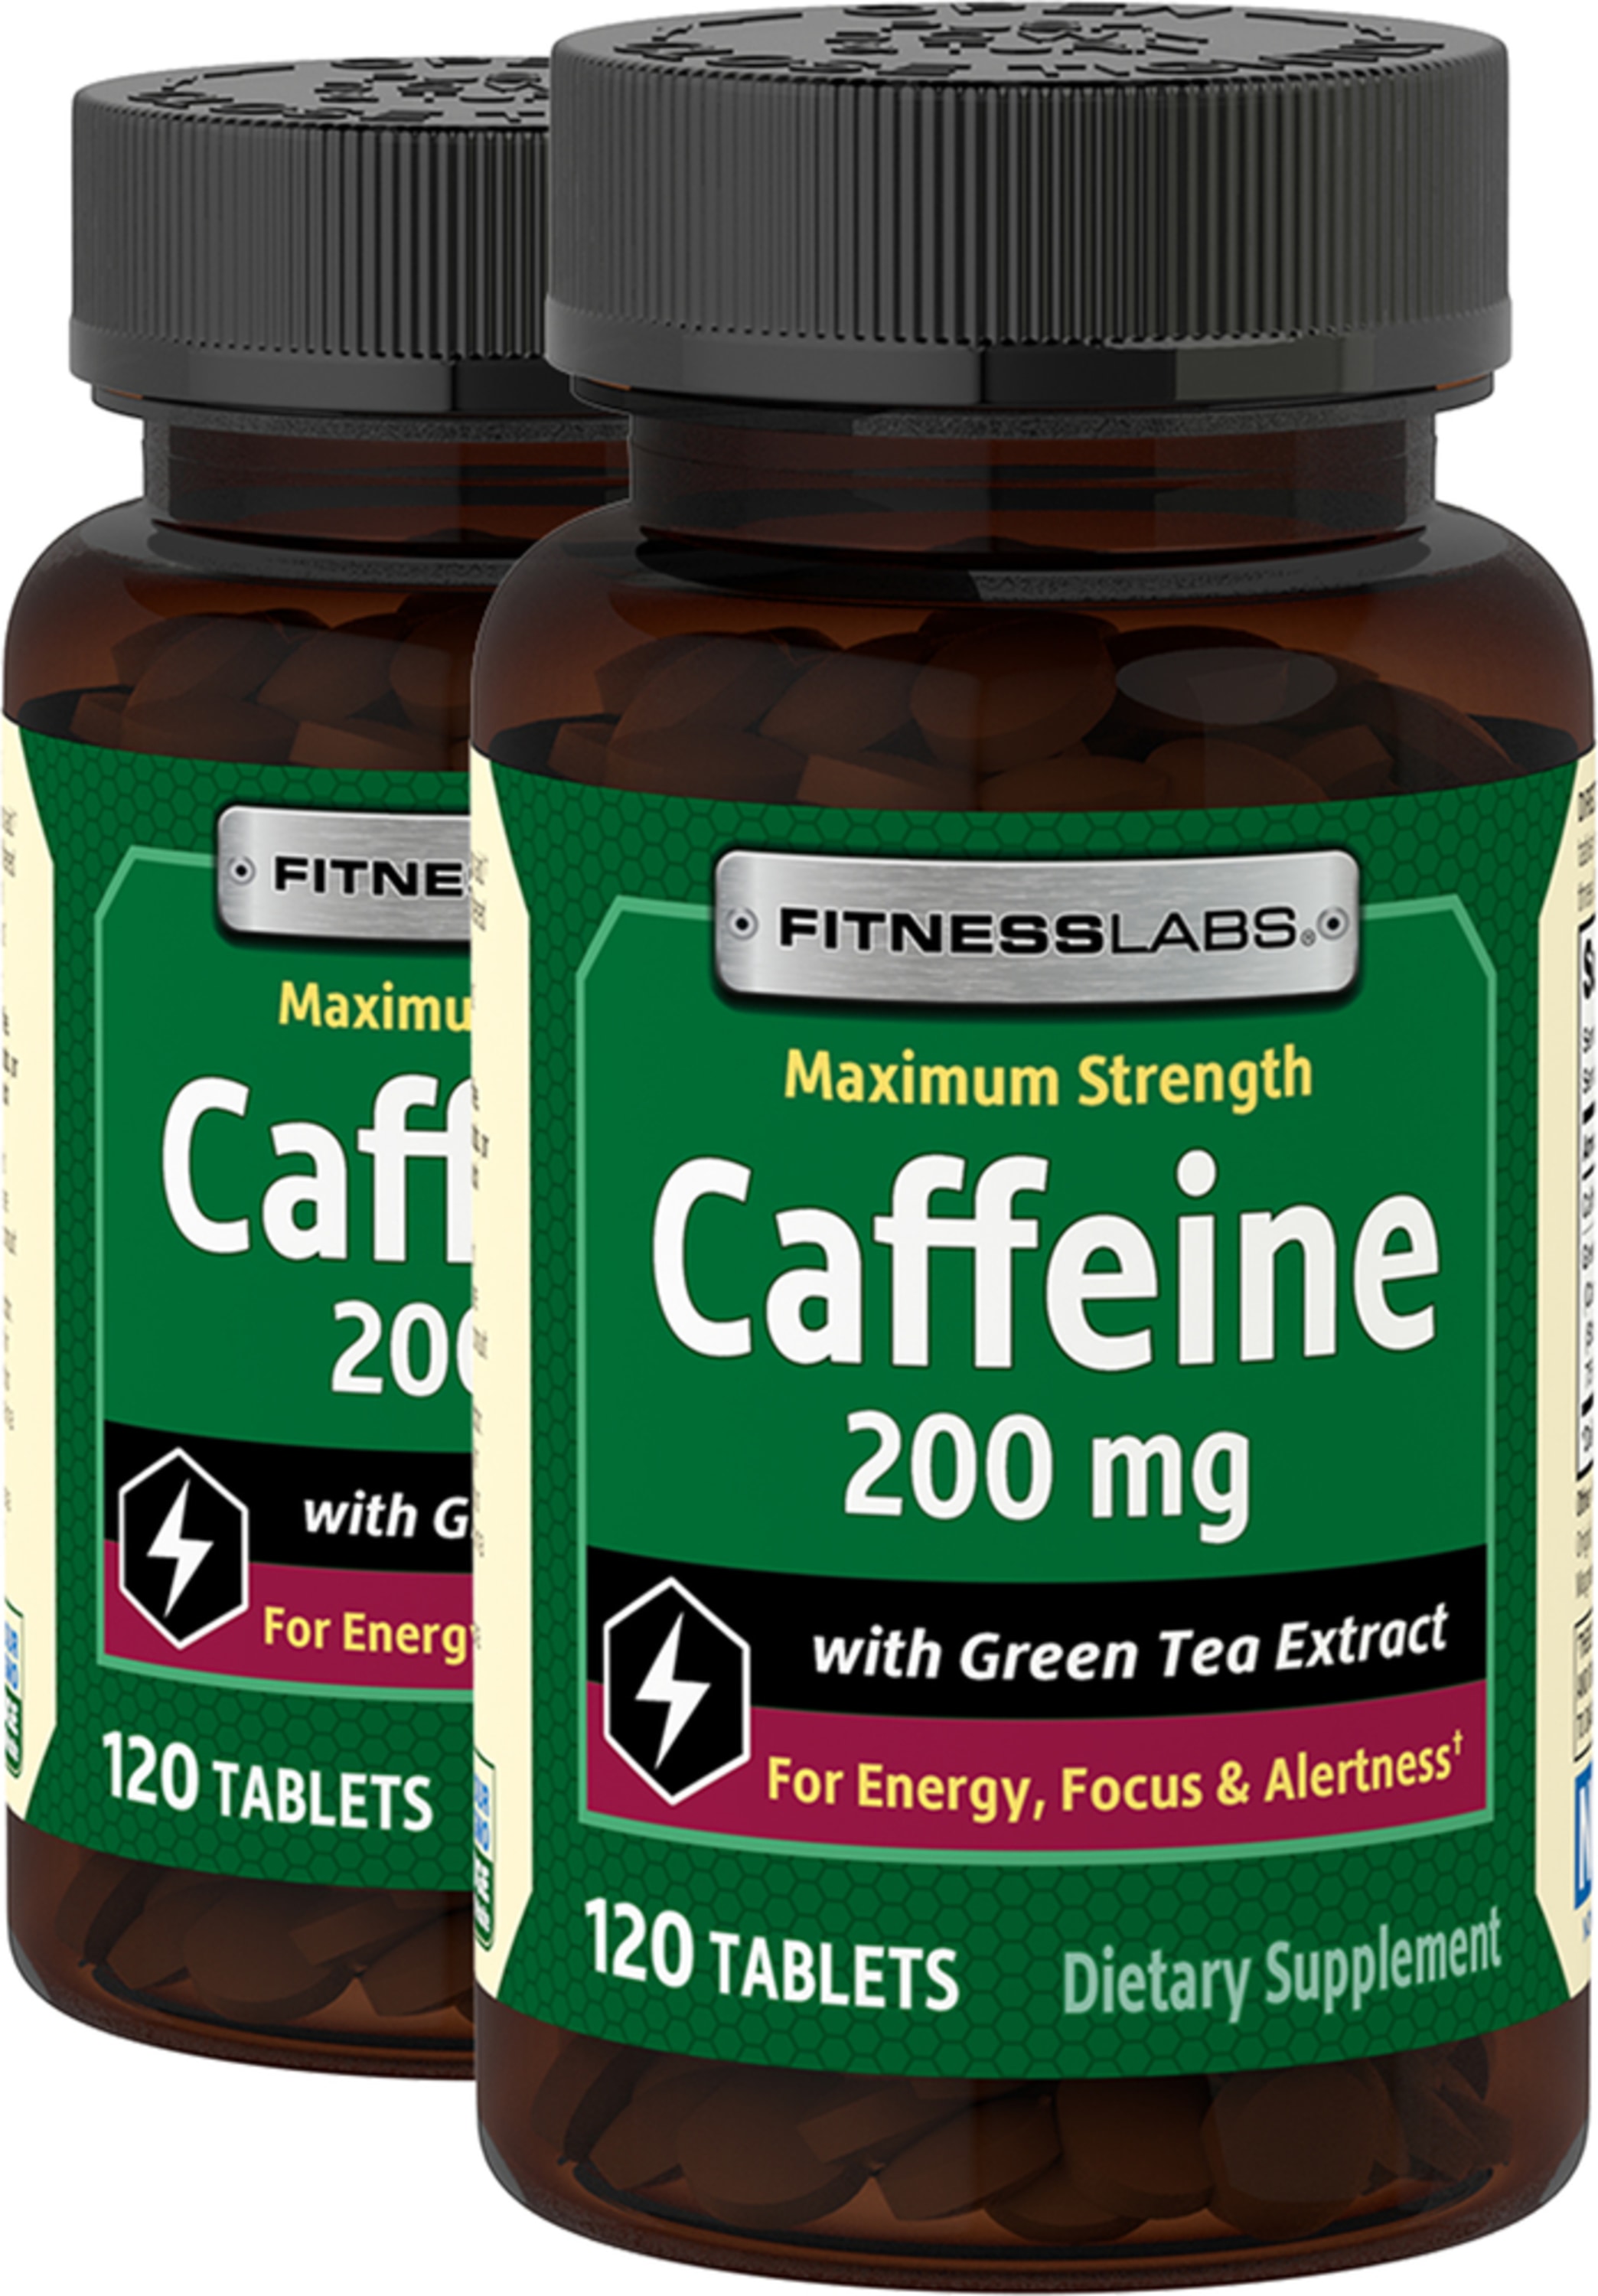 https://cdn2.pipingrock.com/images/product/amazon/product/caffeine-200-mg-with-green-tea-extract-120-tablets-23401.jpg?tx=w_3000,h_3000,c_fit&v=3